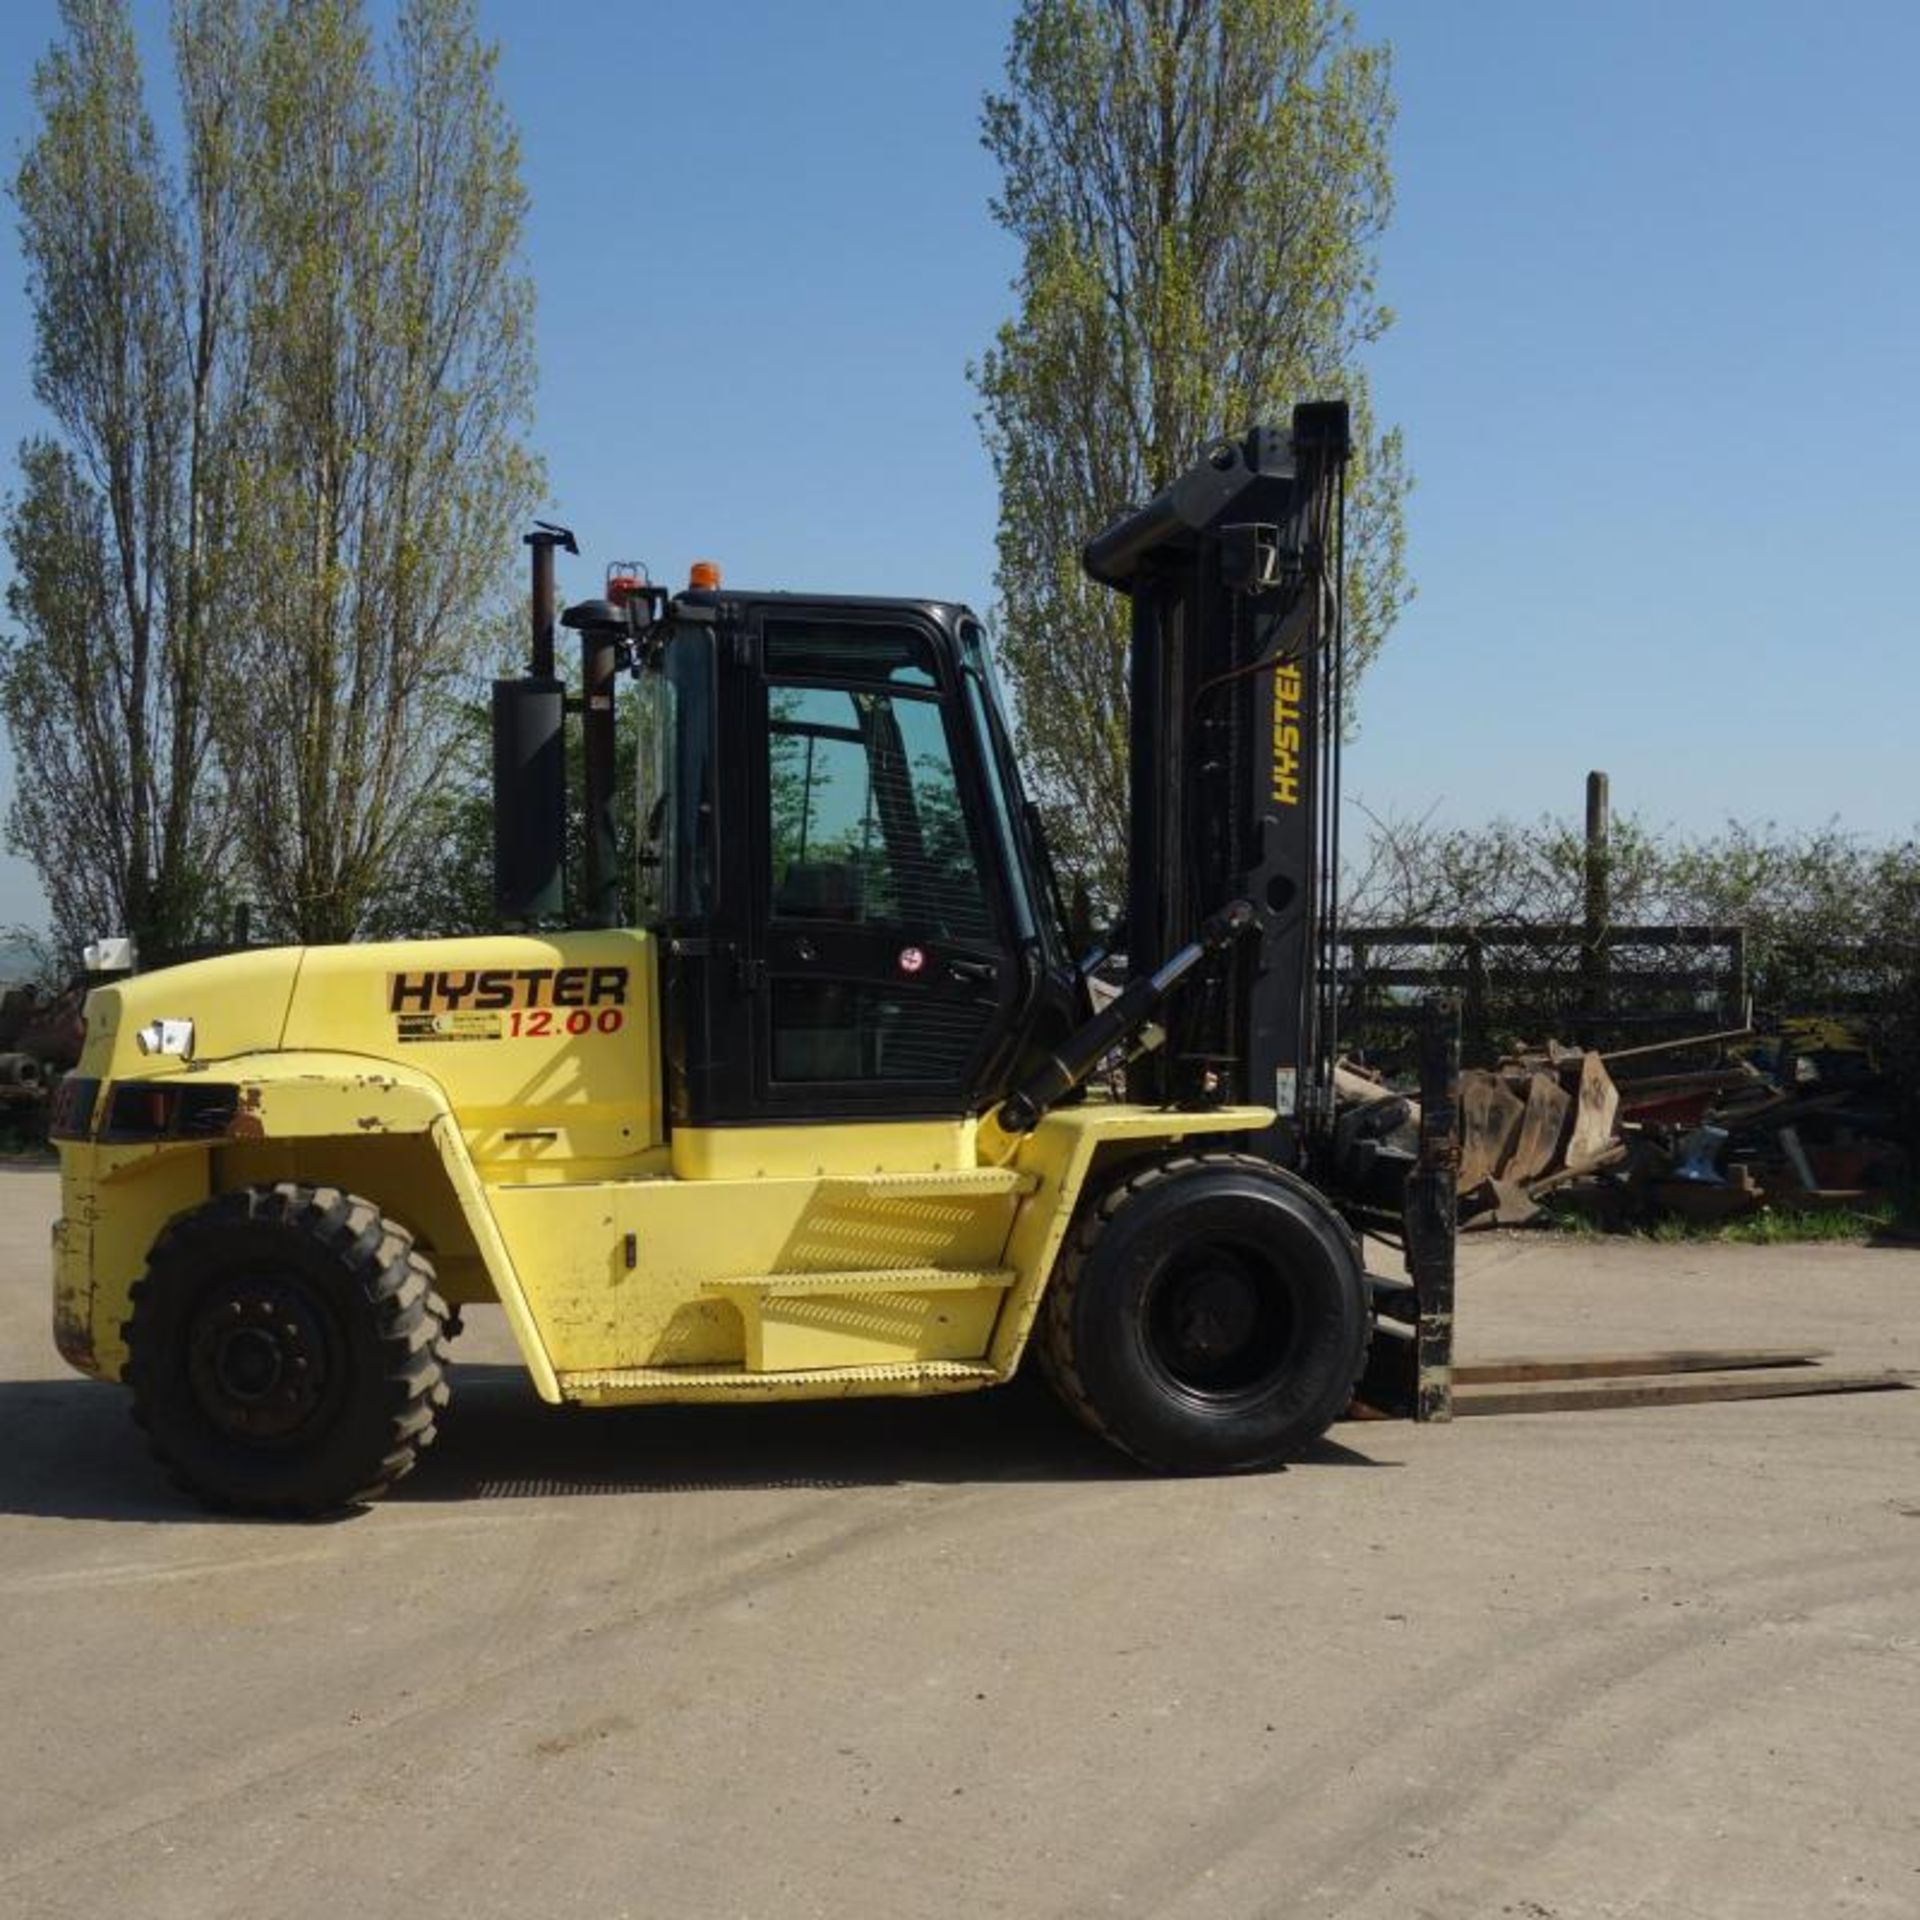 2006 Hyster M12.00xm 12 Ton Forklift, 8151 Hours From New - Image 7 of 12